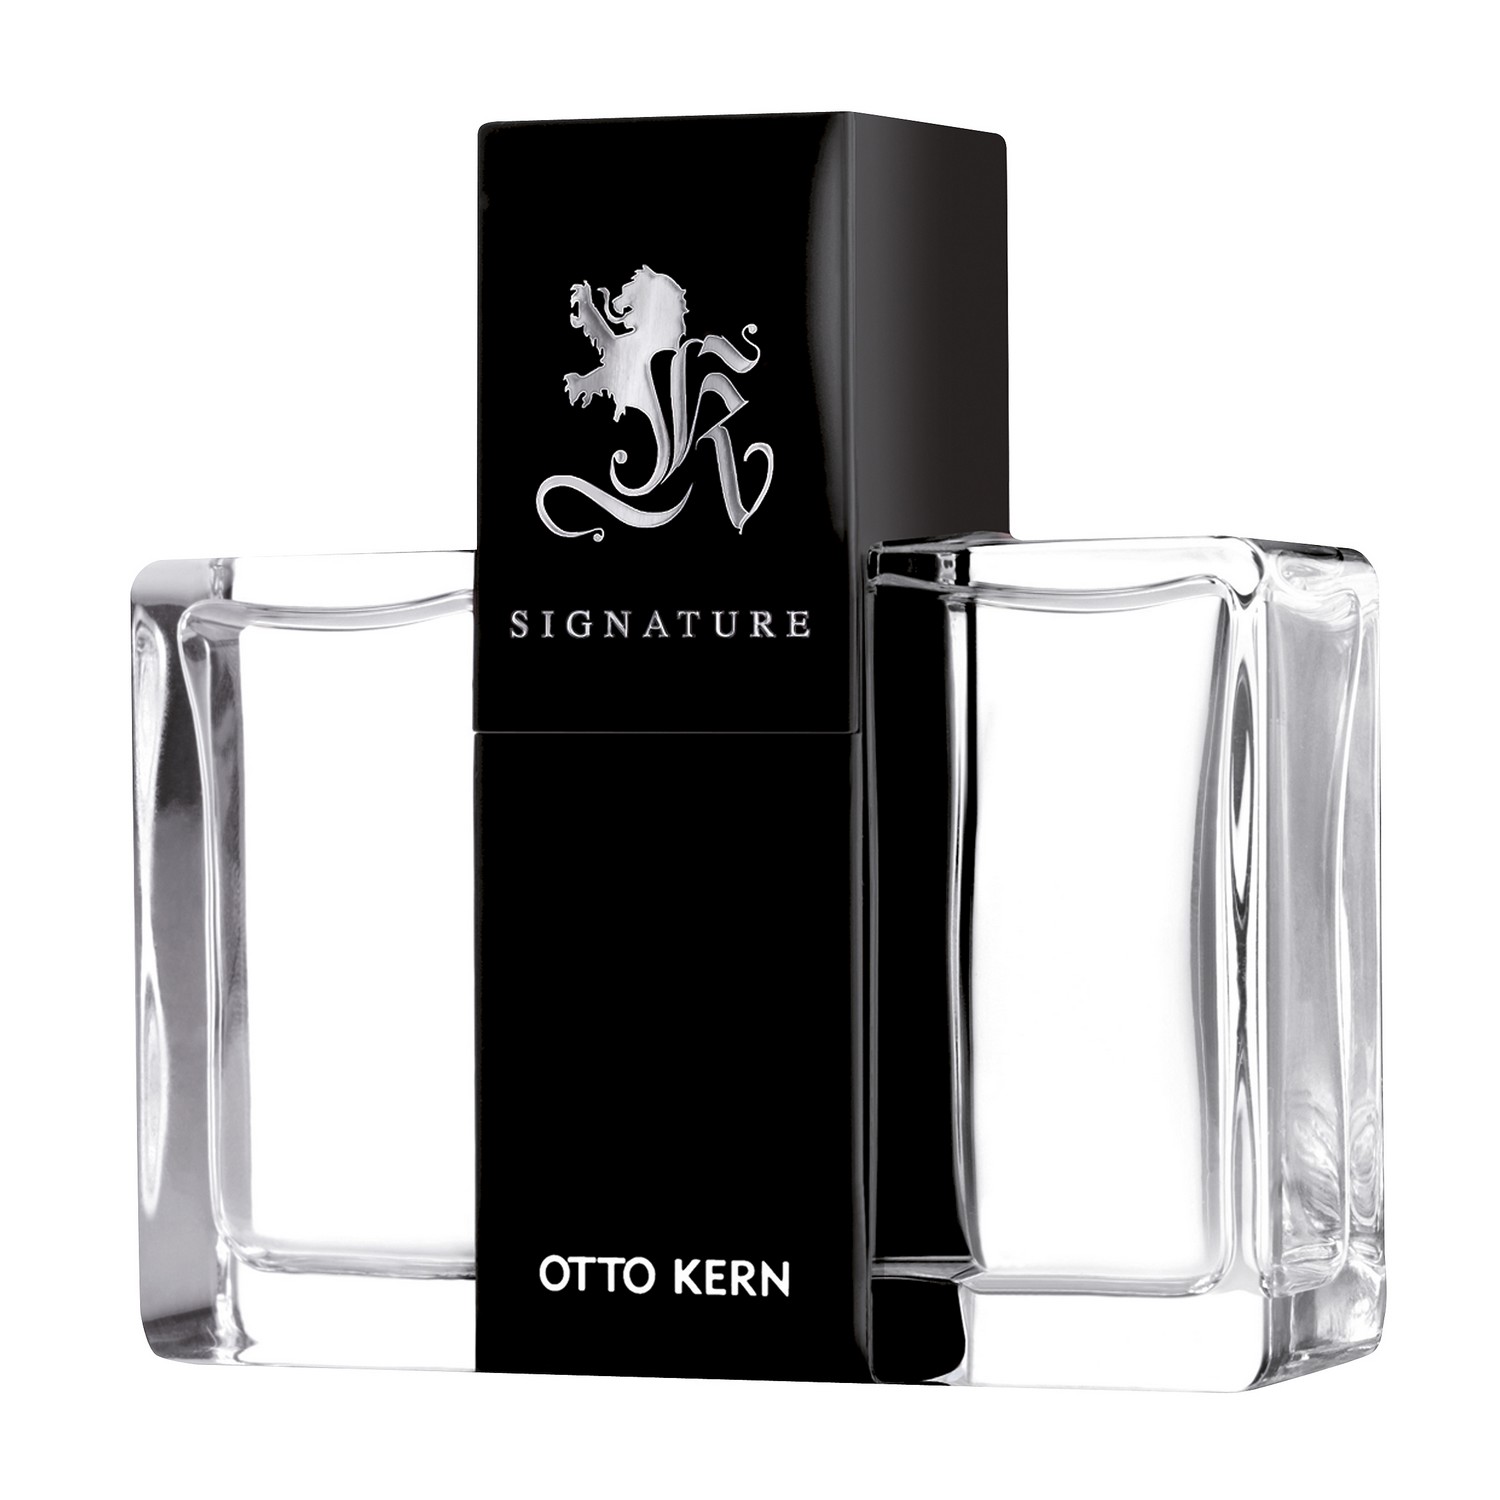 Otto Kern Signature Man After Shave Lotion 50ml